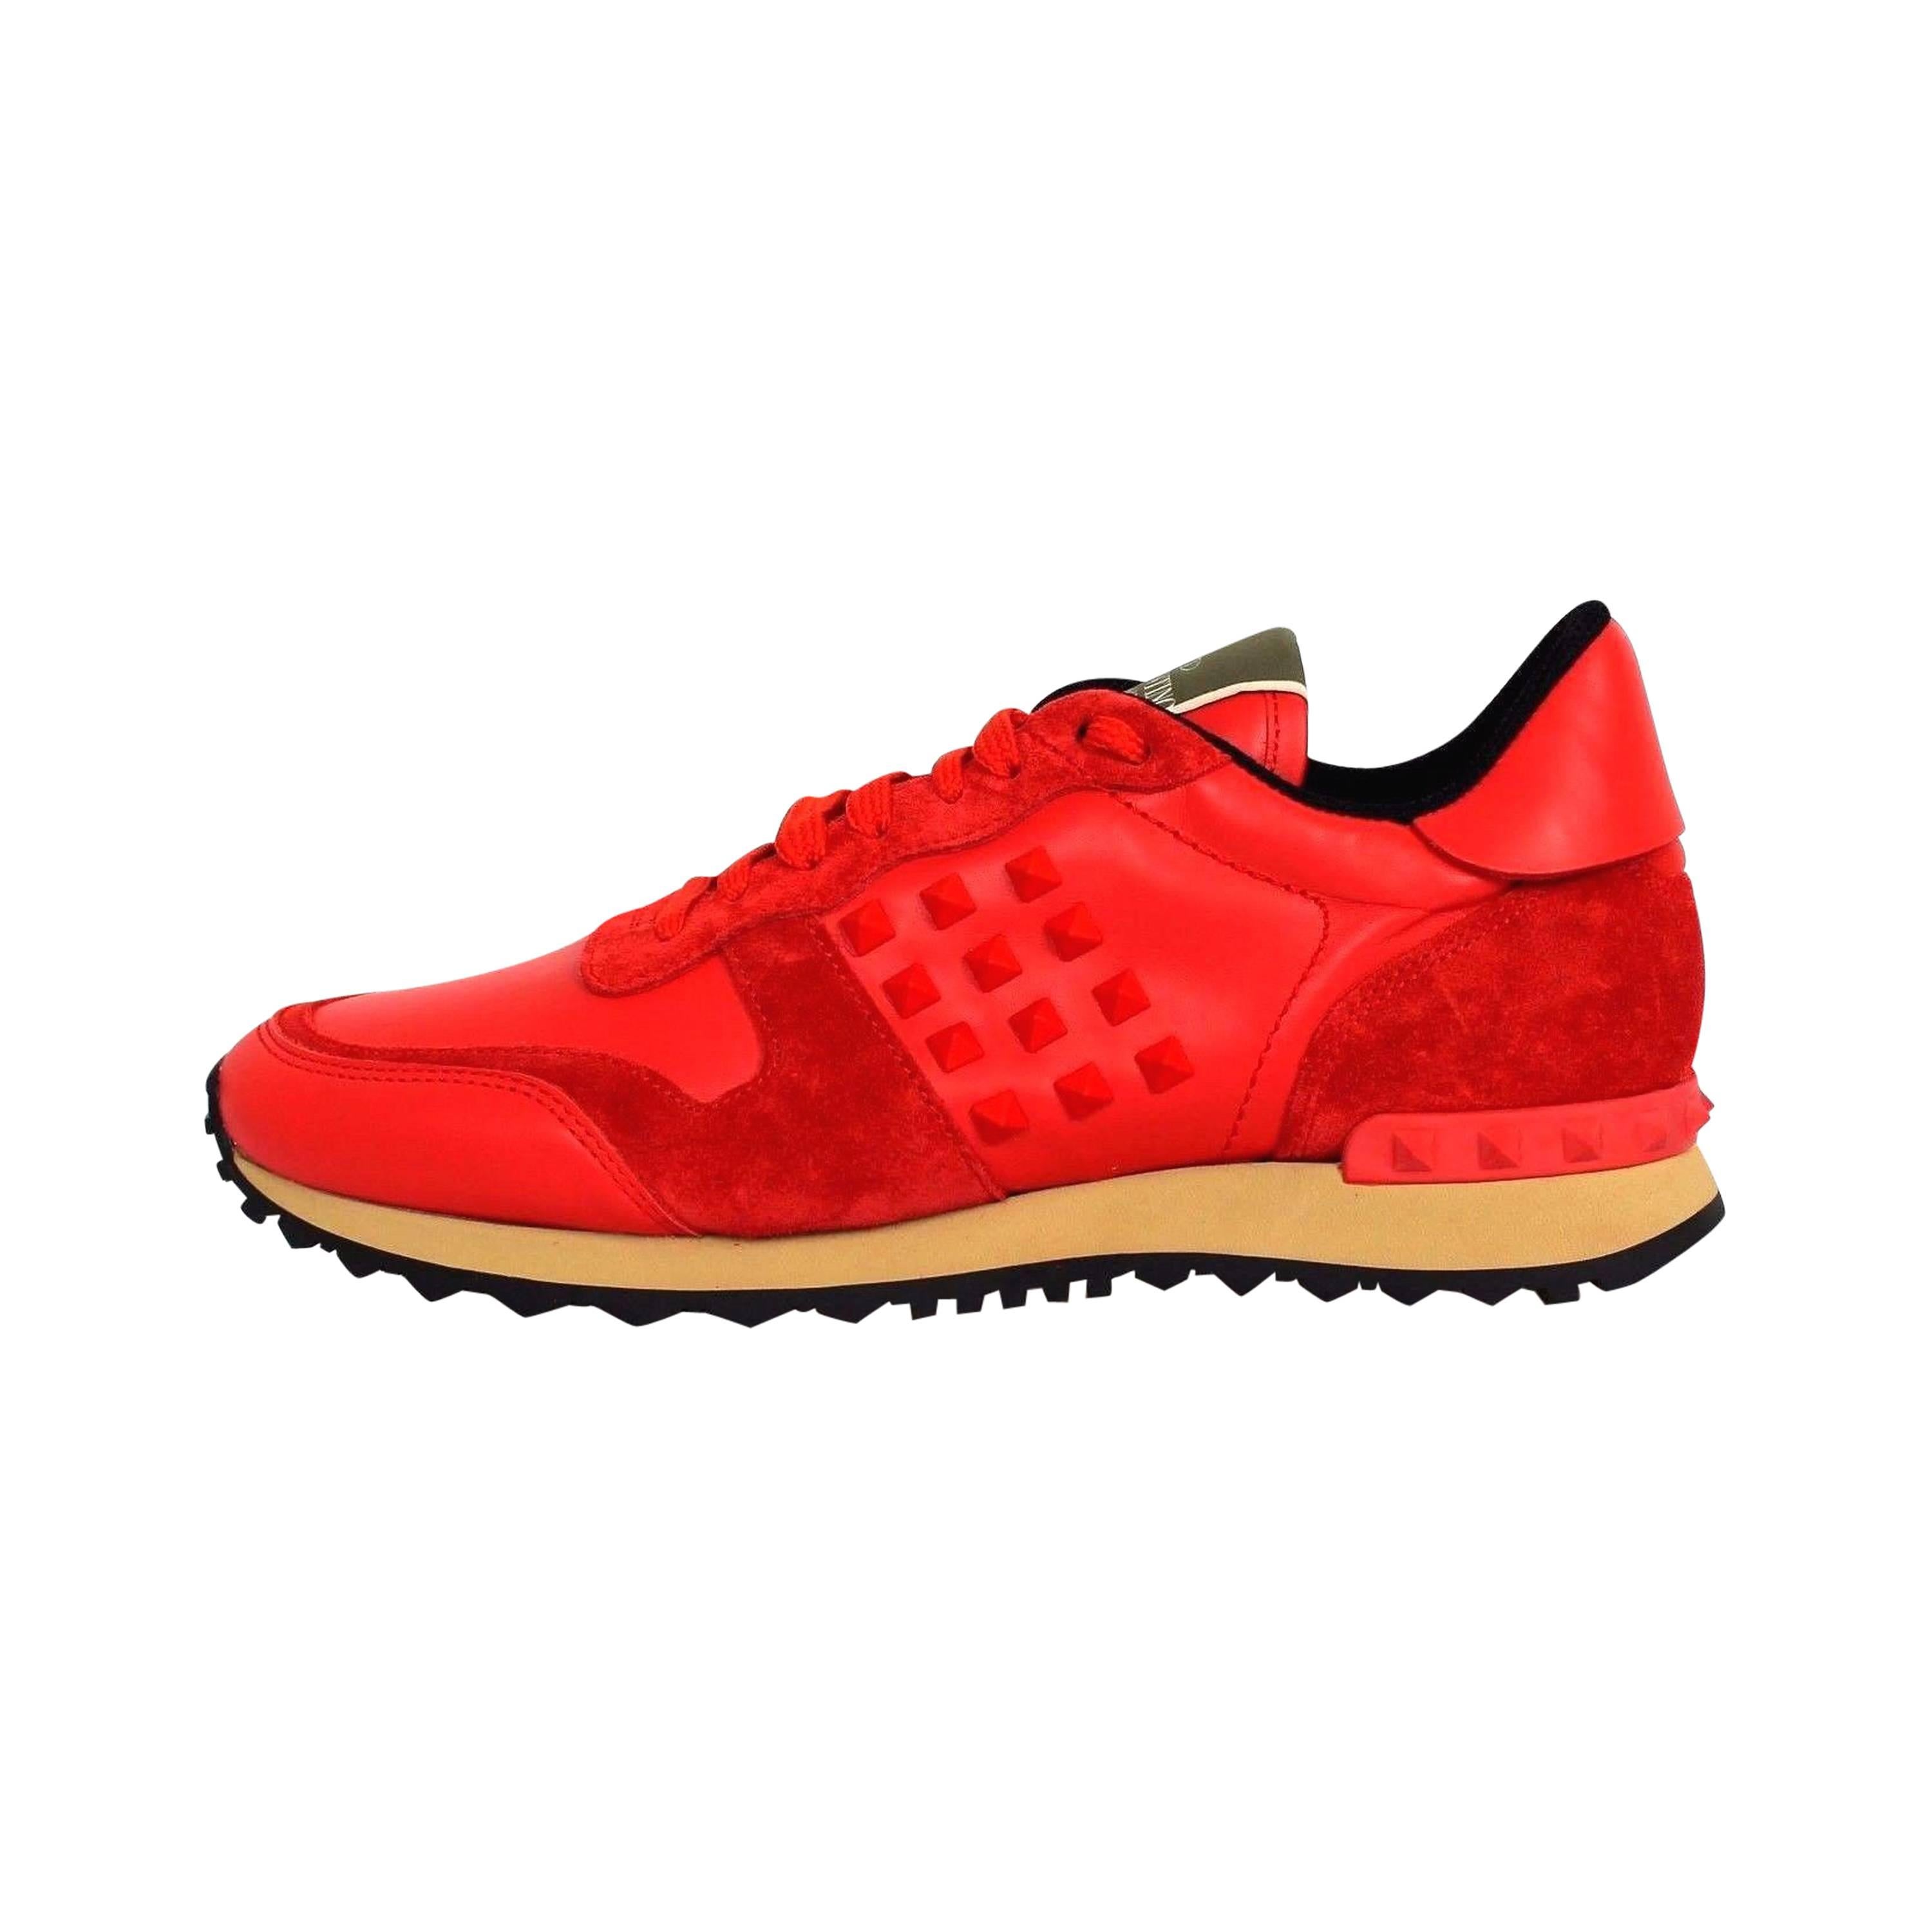 Valentino Red Leather Suede Rockstud Studded Lace up Sneakers New For Sale